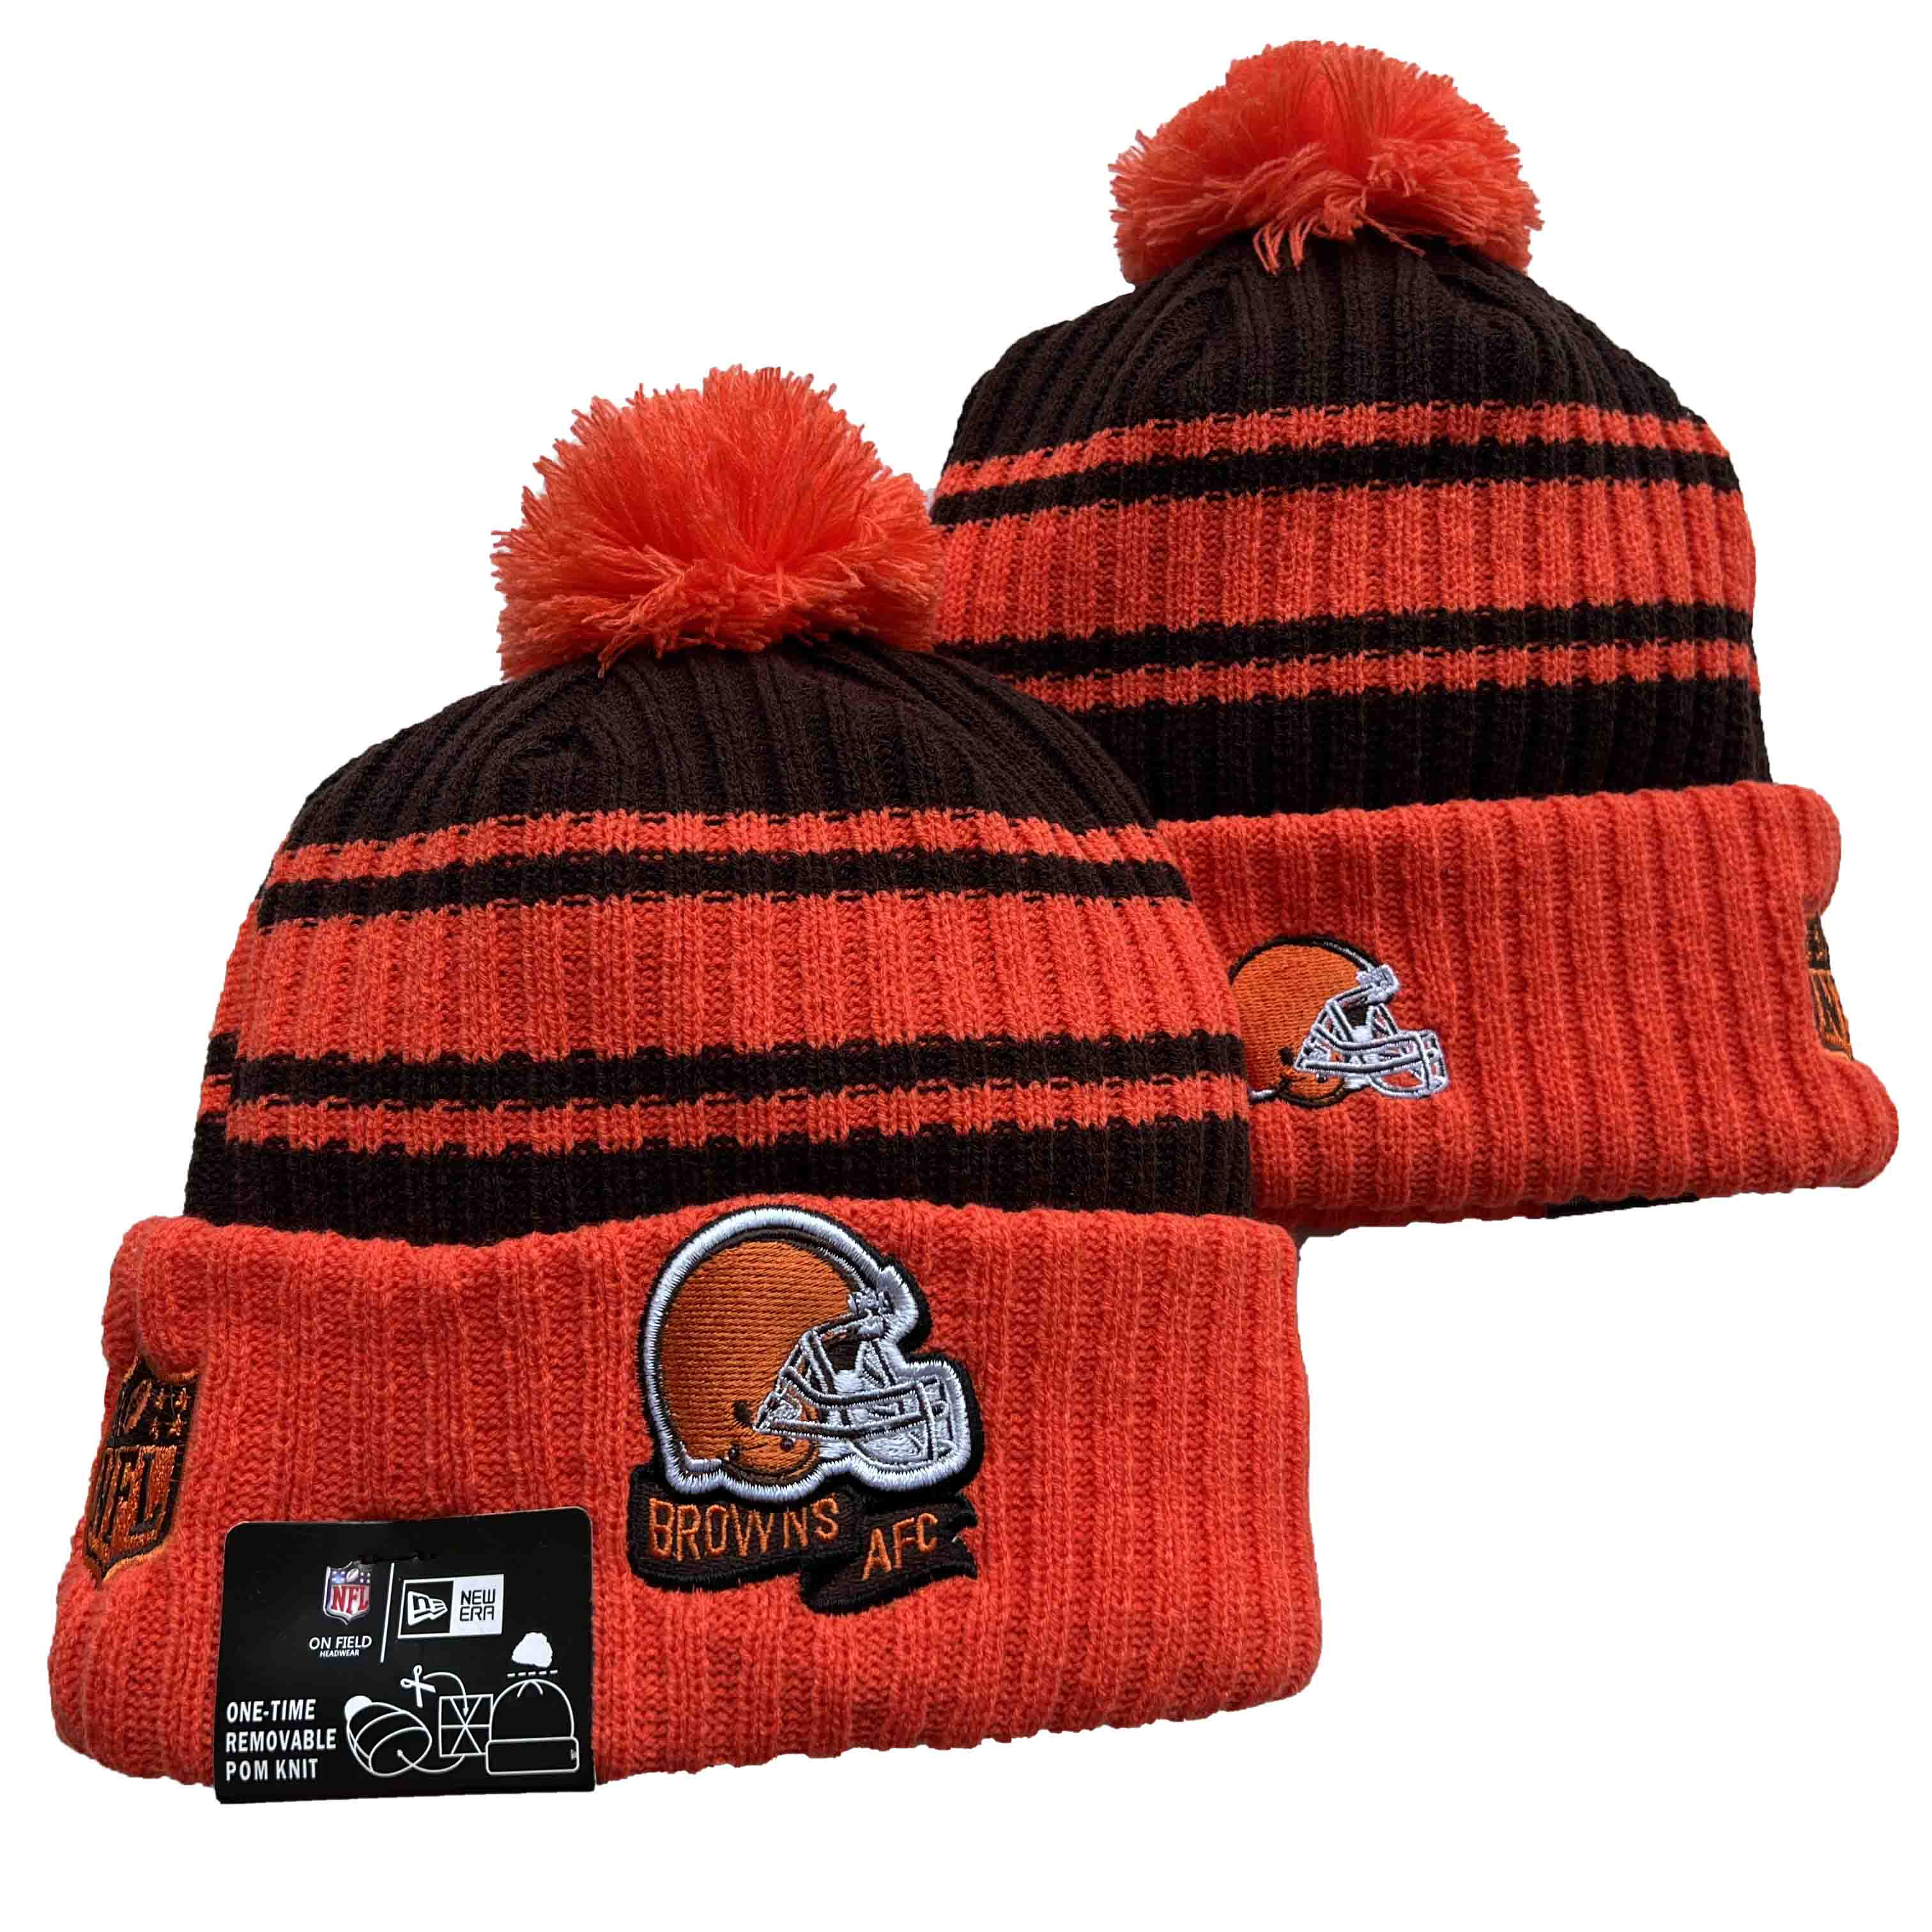 NFL Cleveland Browns Beanies Knit Hats-YD1304